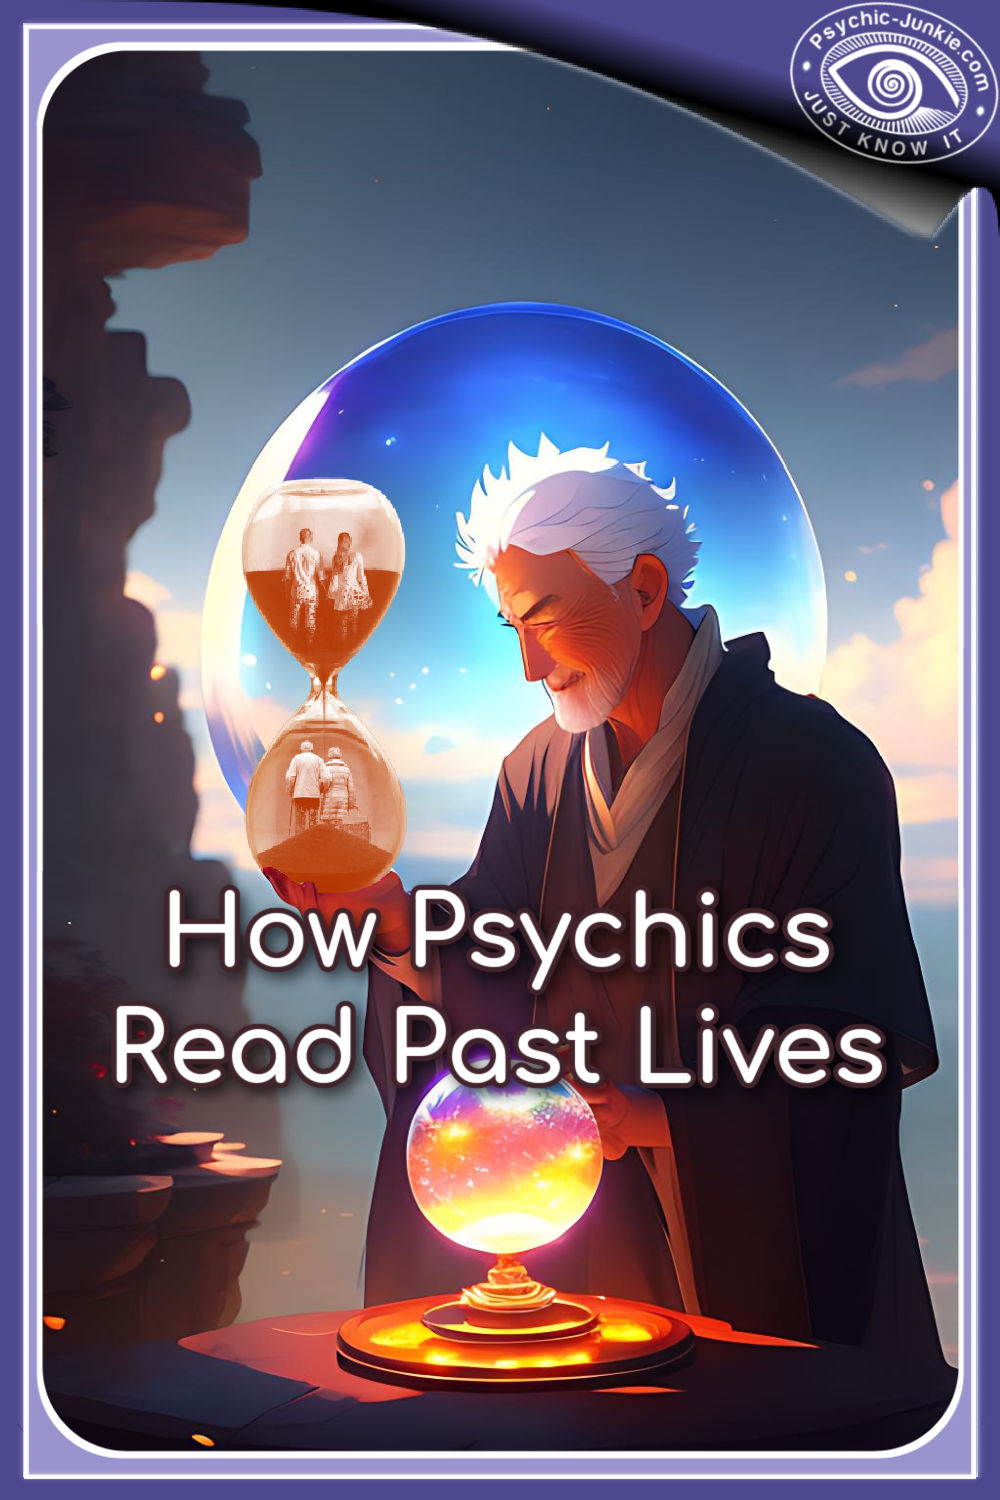 A wise psychic tuning into your past lives through a crystal ball